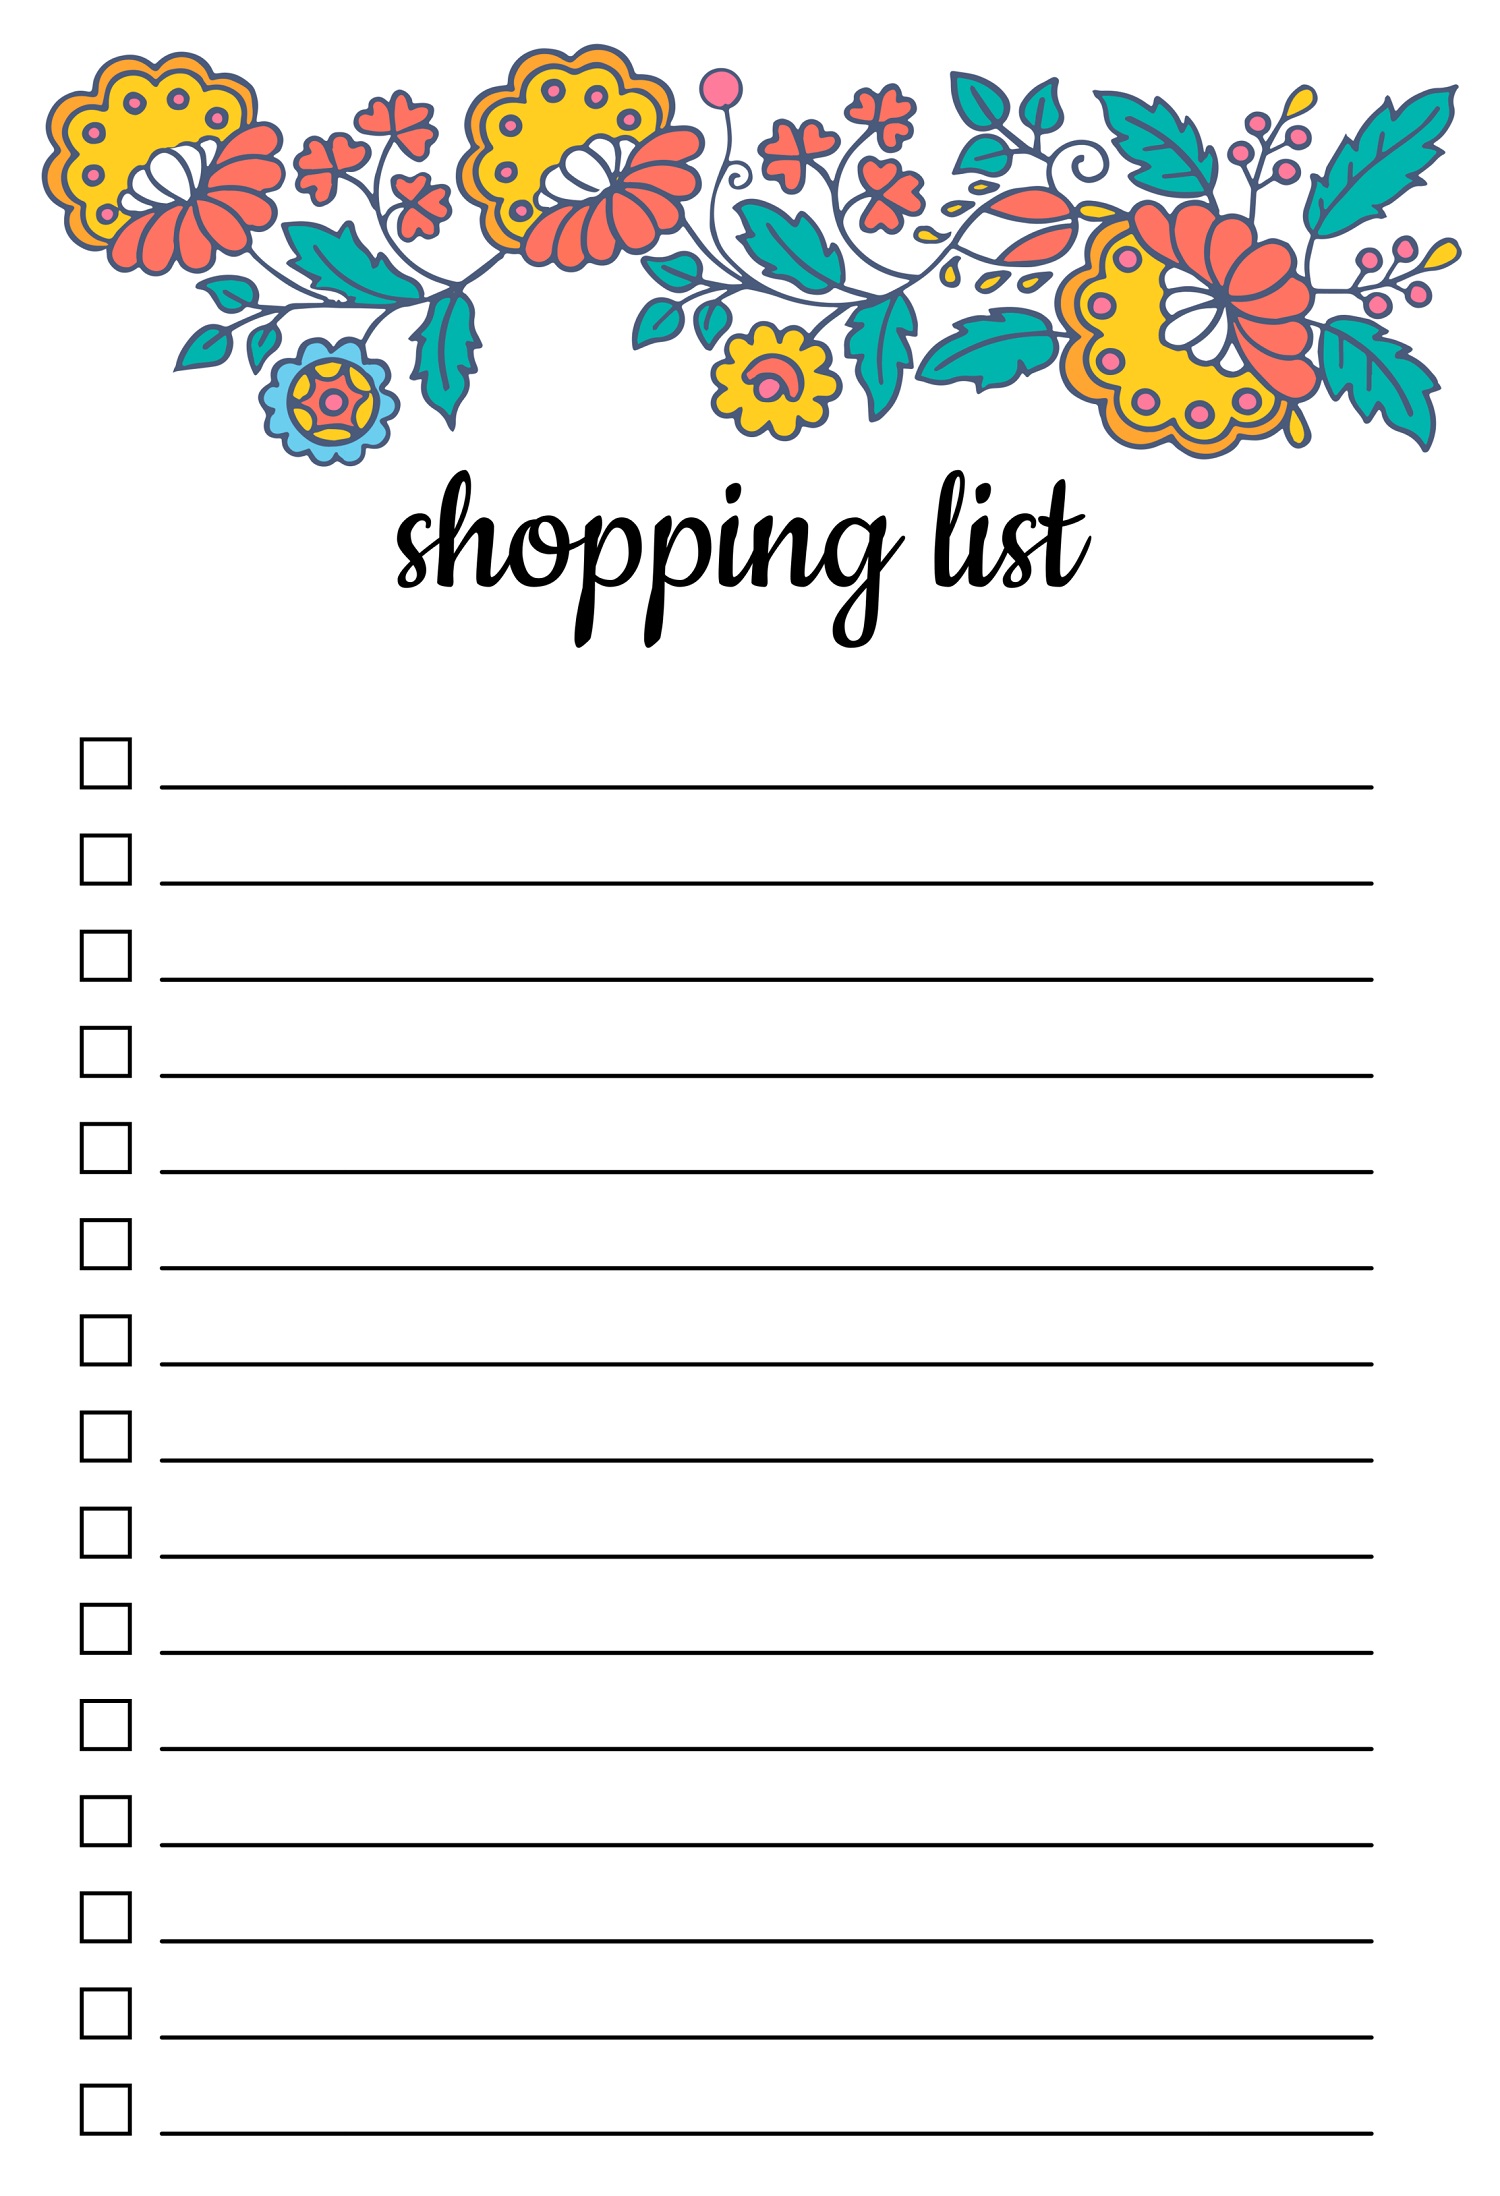 Printable Management Shopping List Template For Kid